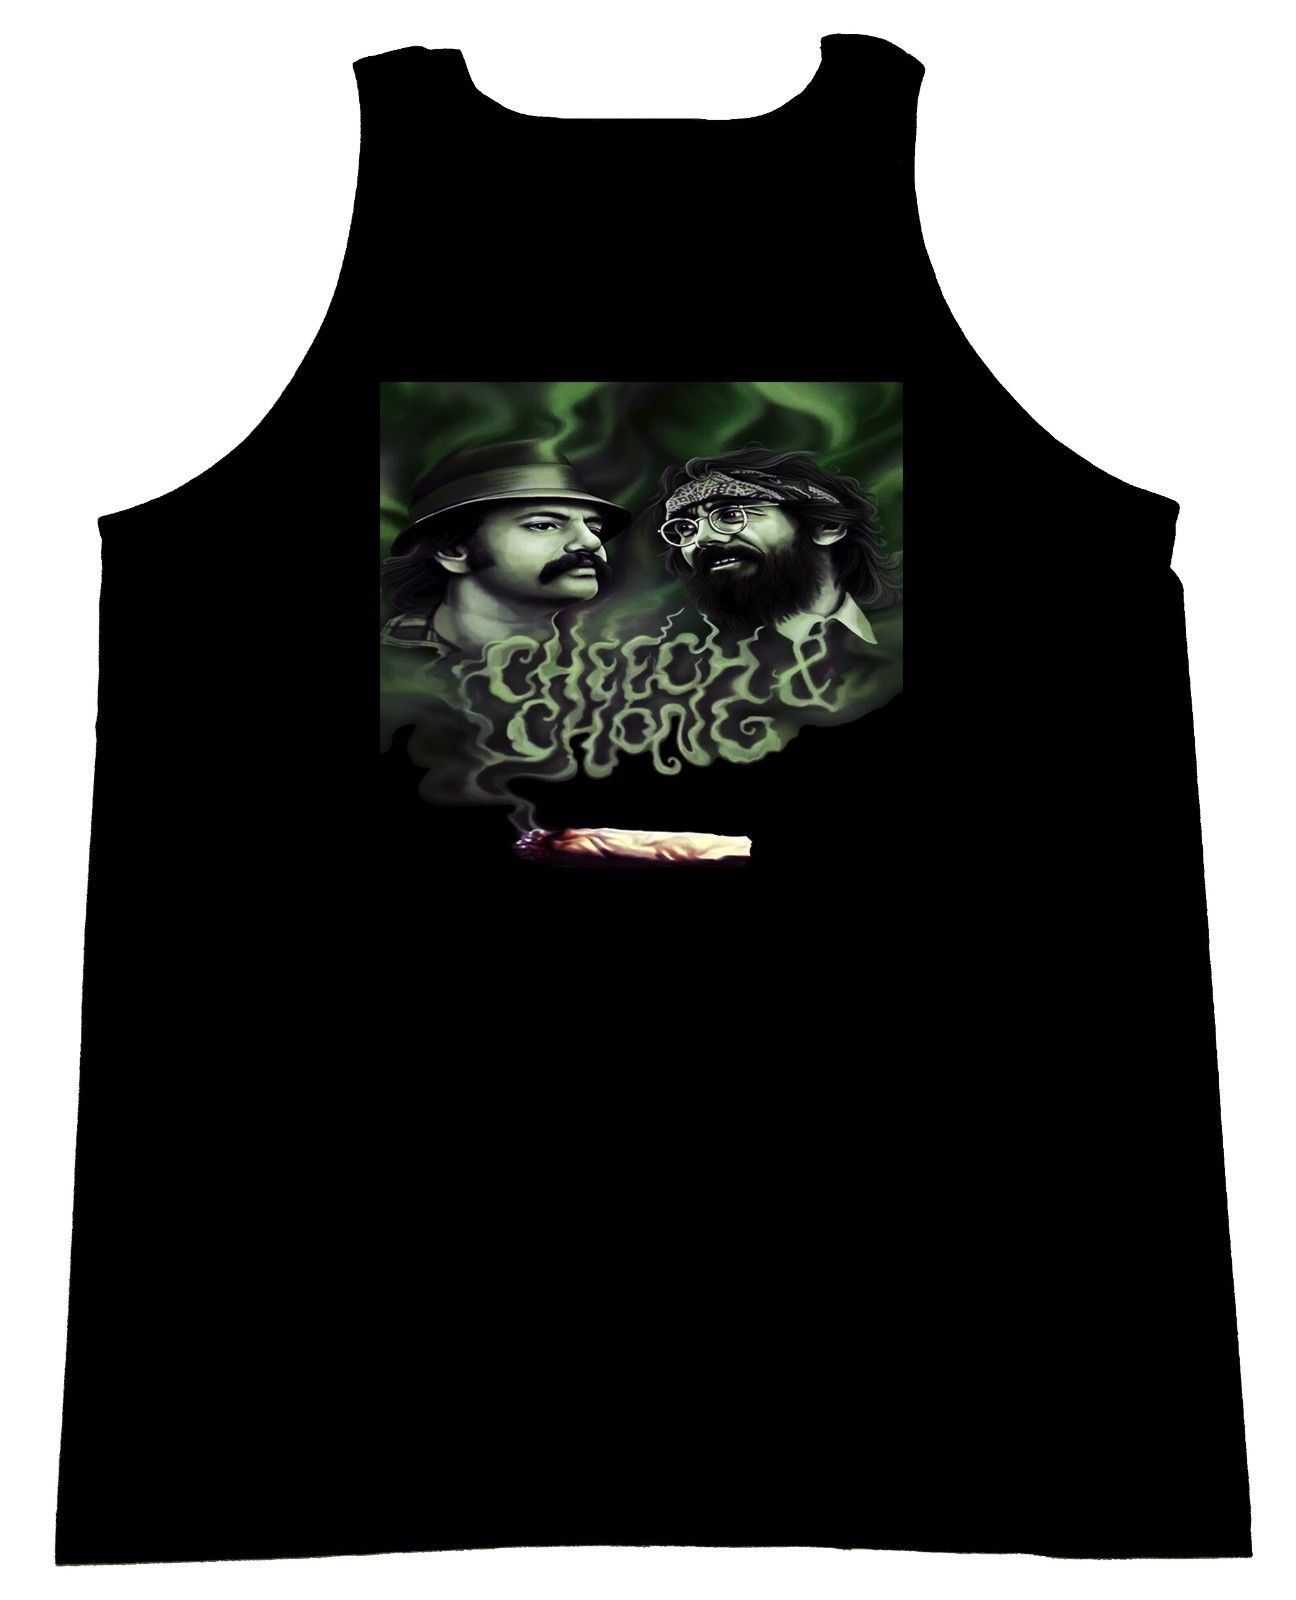 Unbranded - Cheech and chong up in smoke men's tank top